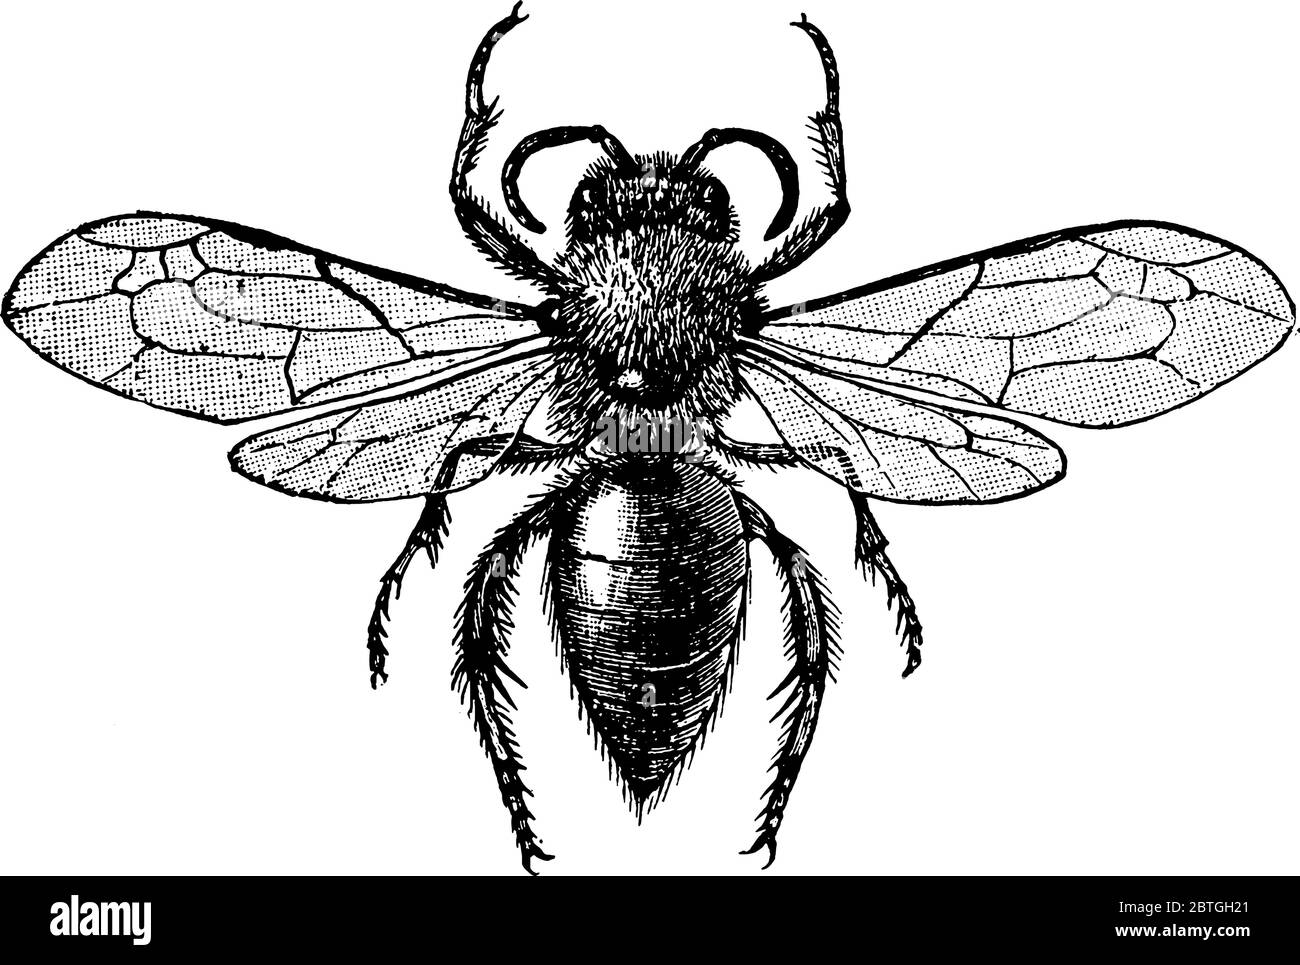 Bees(Anthophila) are flying insects closely related to wasps and ants, vintage line drawing or engraving illustration. Stock Vector